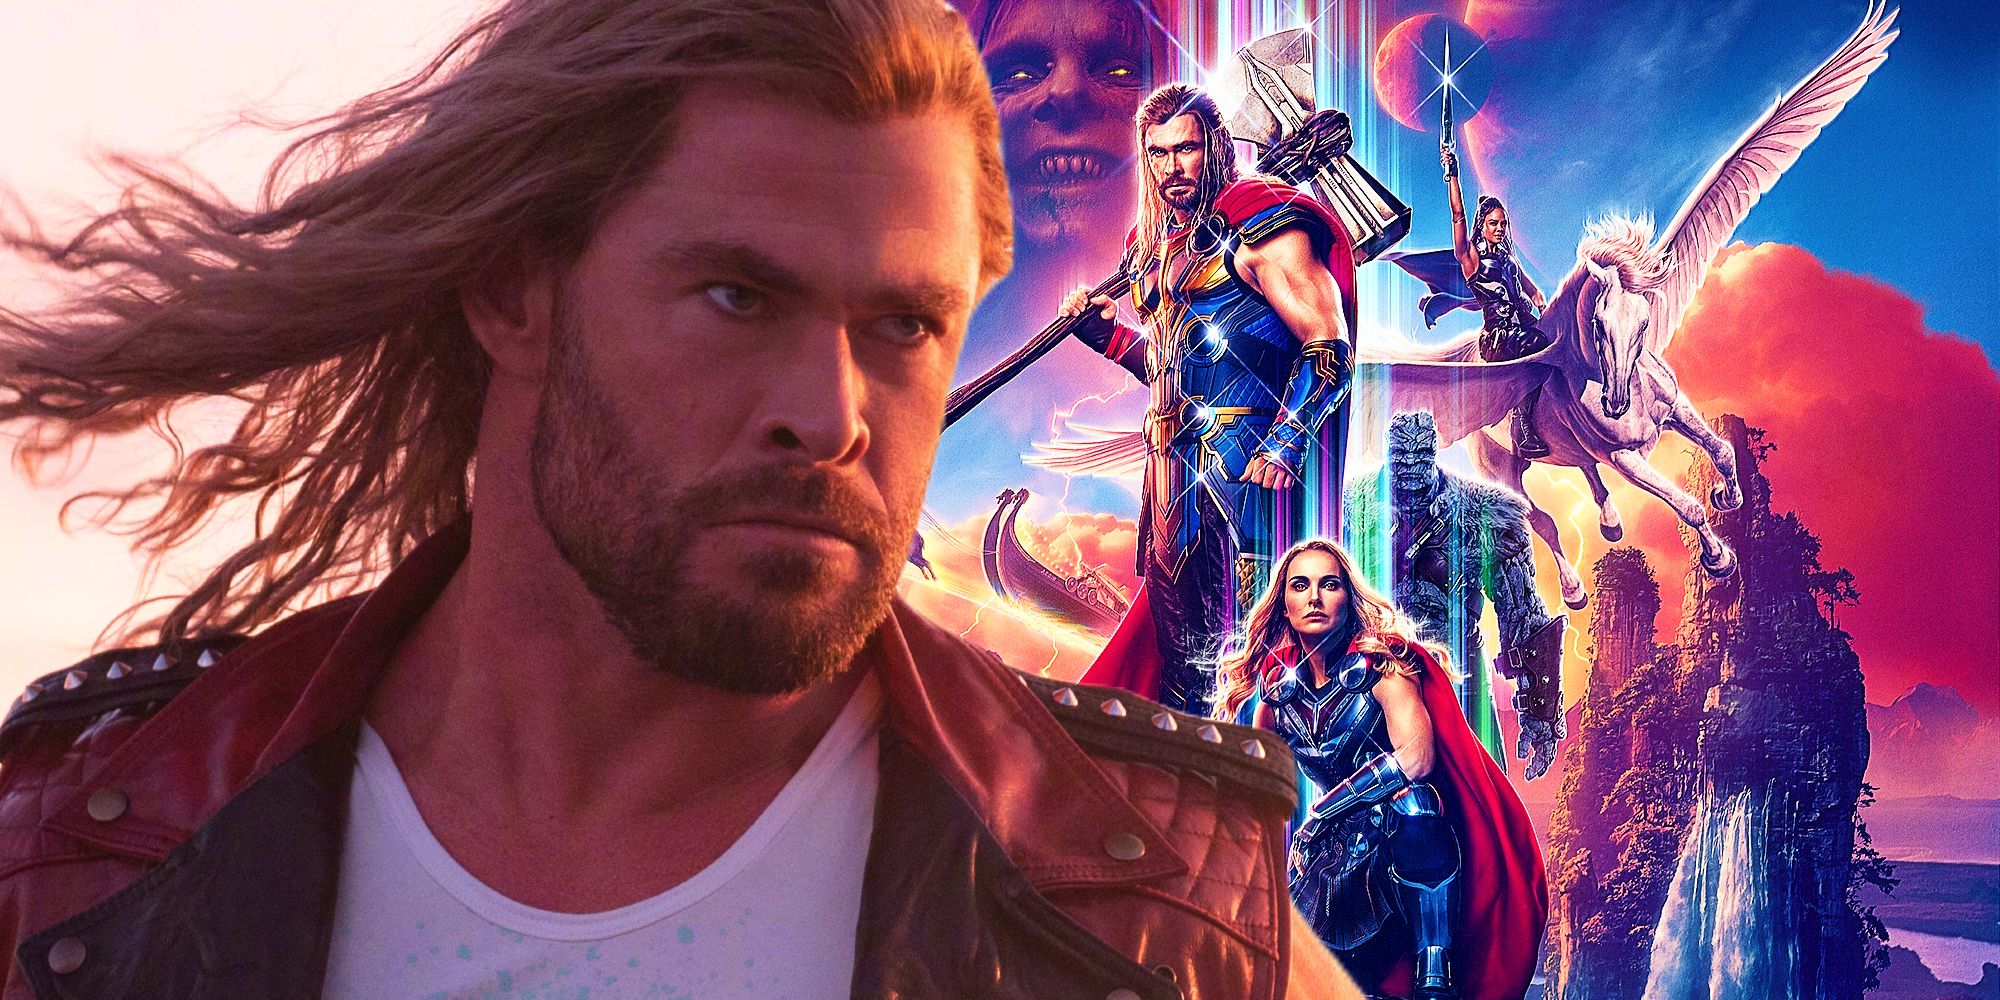 Chris Hemsworth as Thor and the Thor Love and Thunder poster